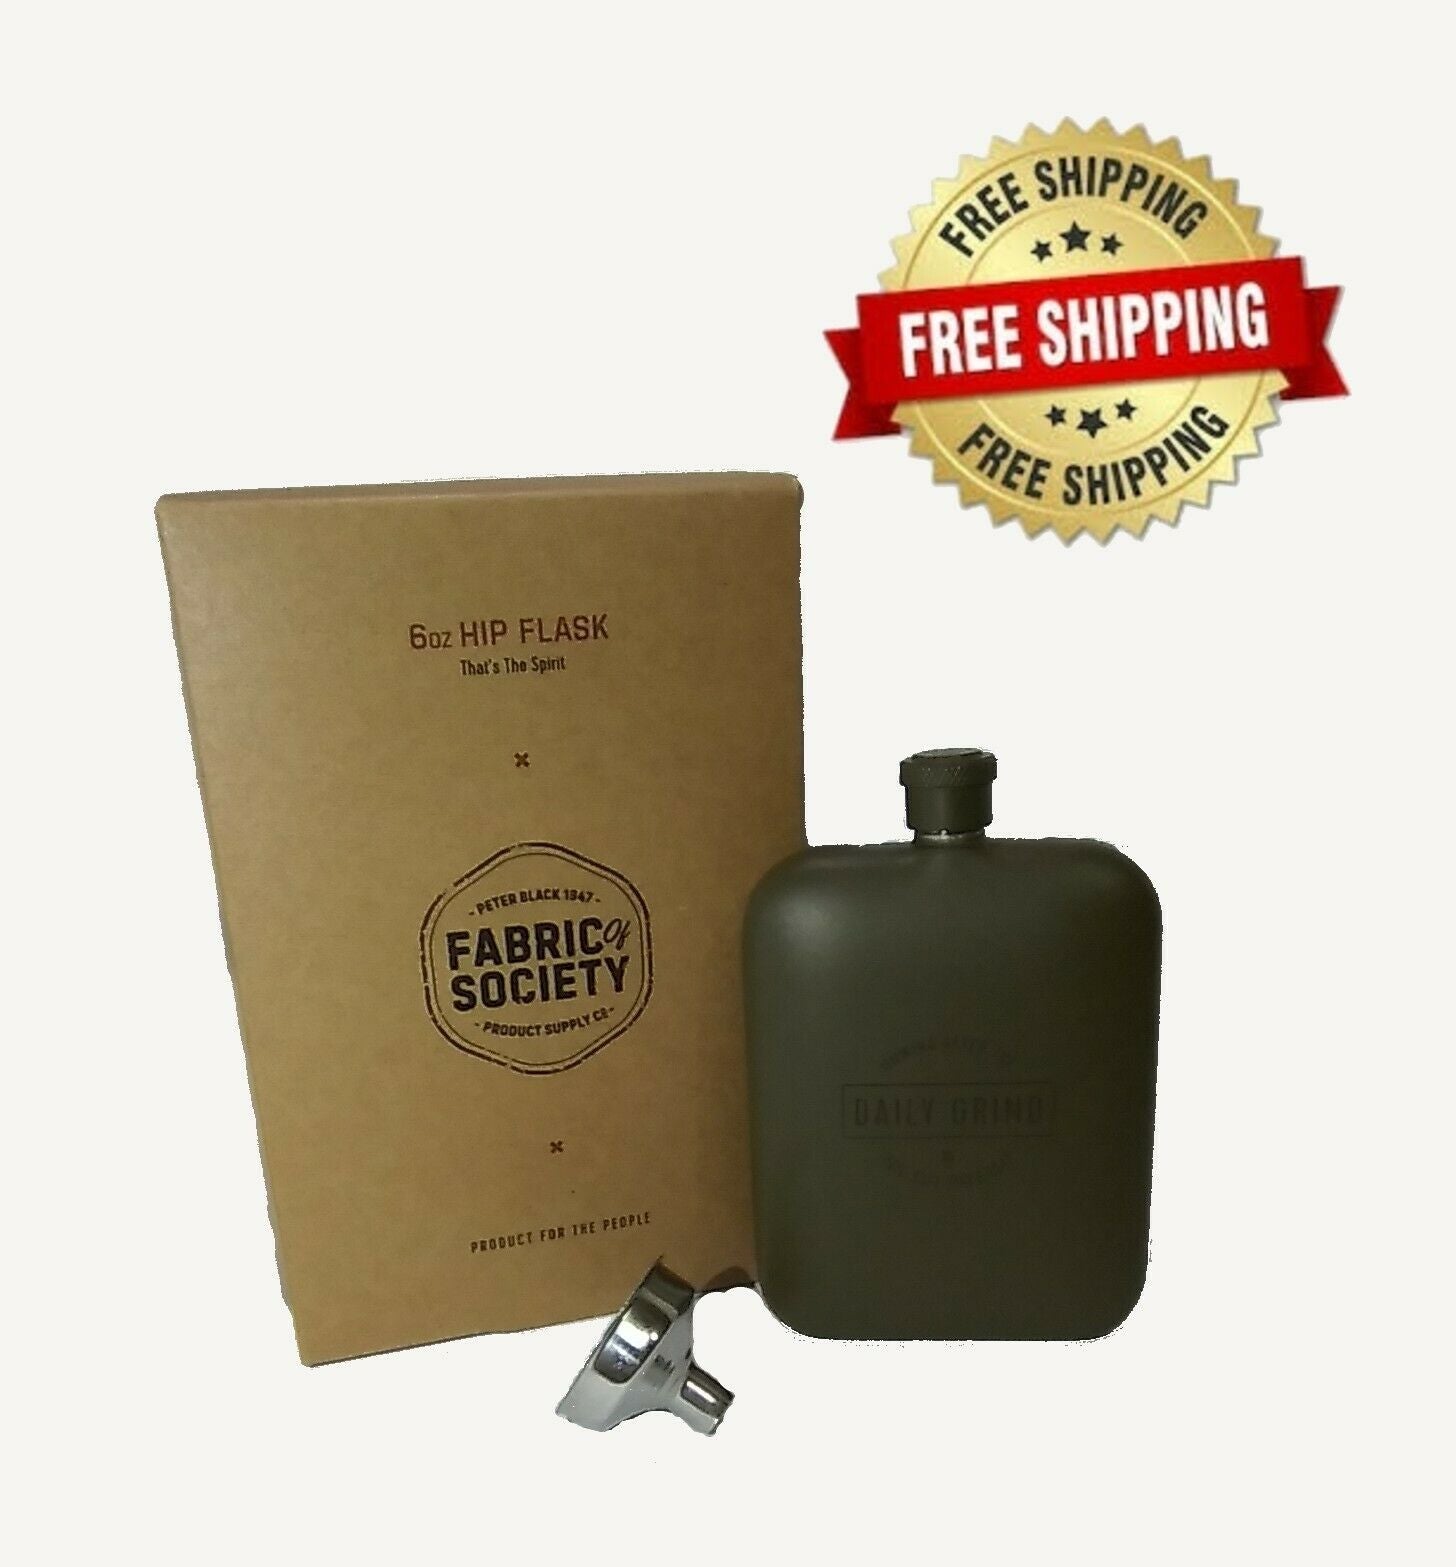 FABRIC OF SOCIETY -PETER BLACK 1947 PRODUCT SUPPLY Co- 6oz HIP FLASK